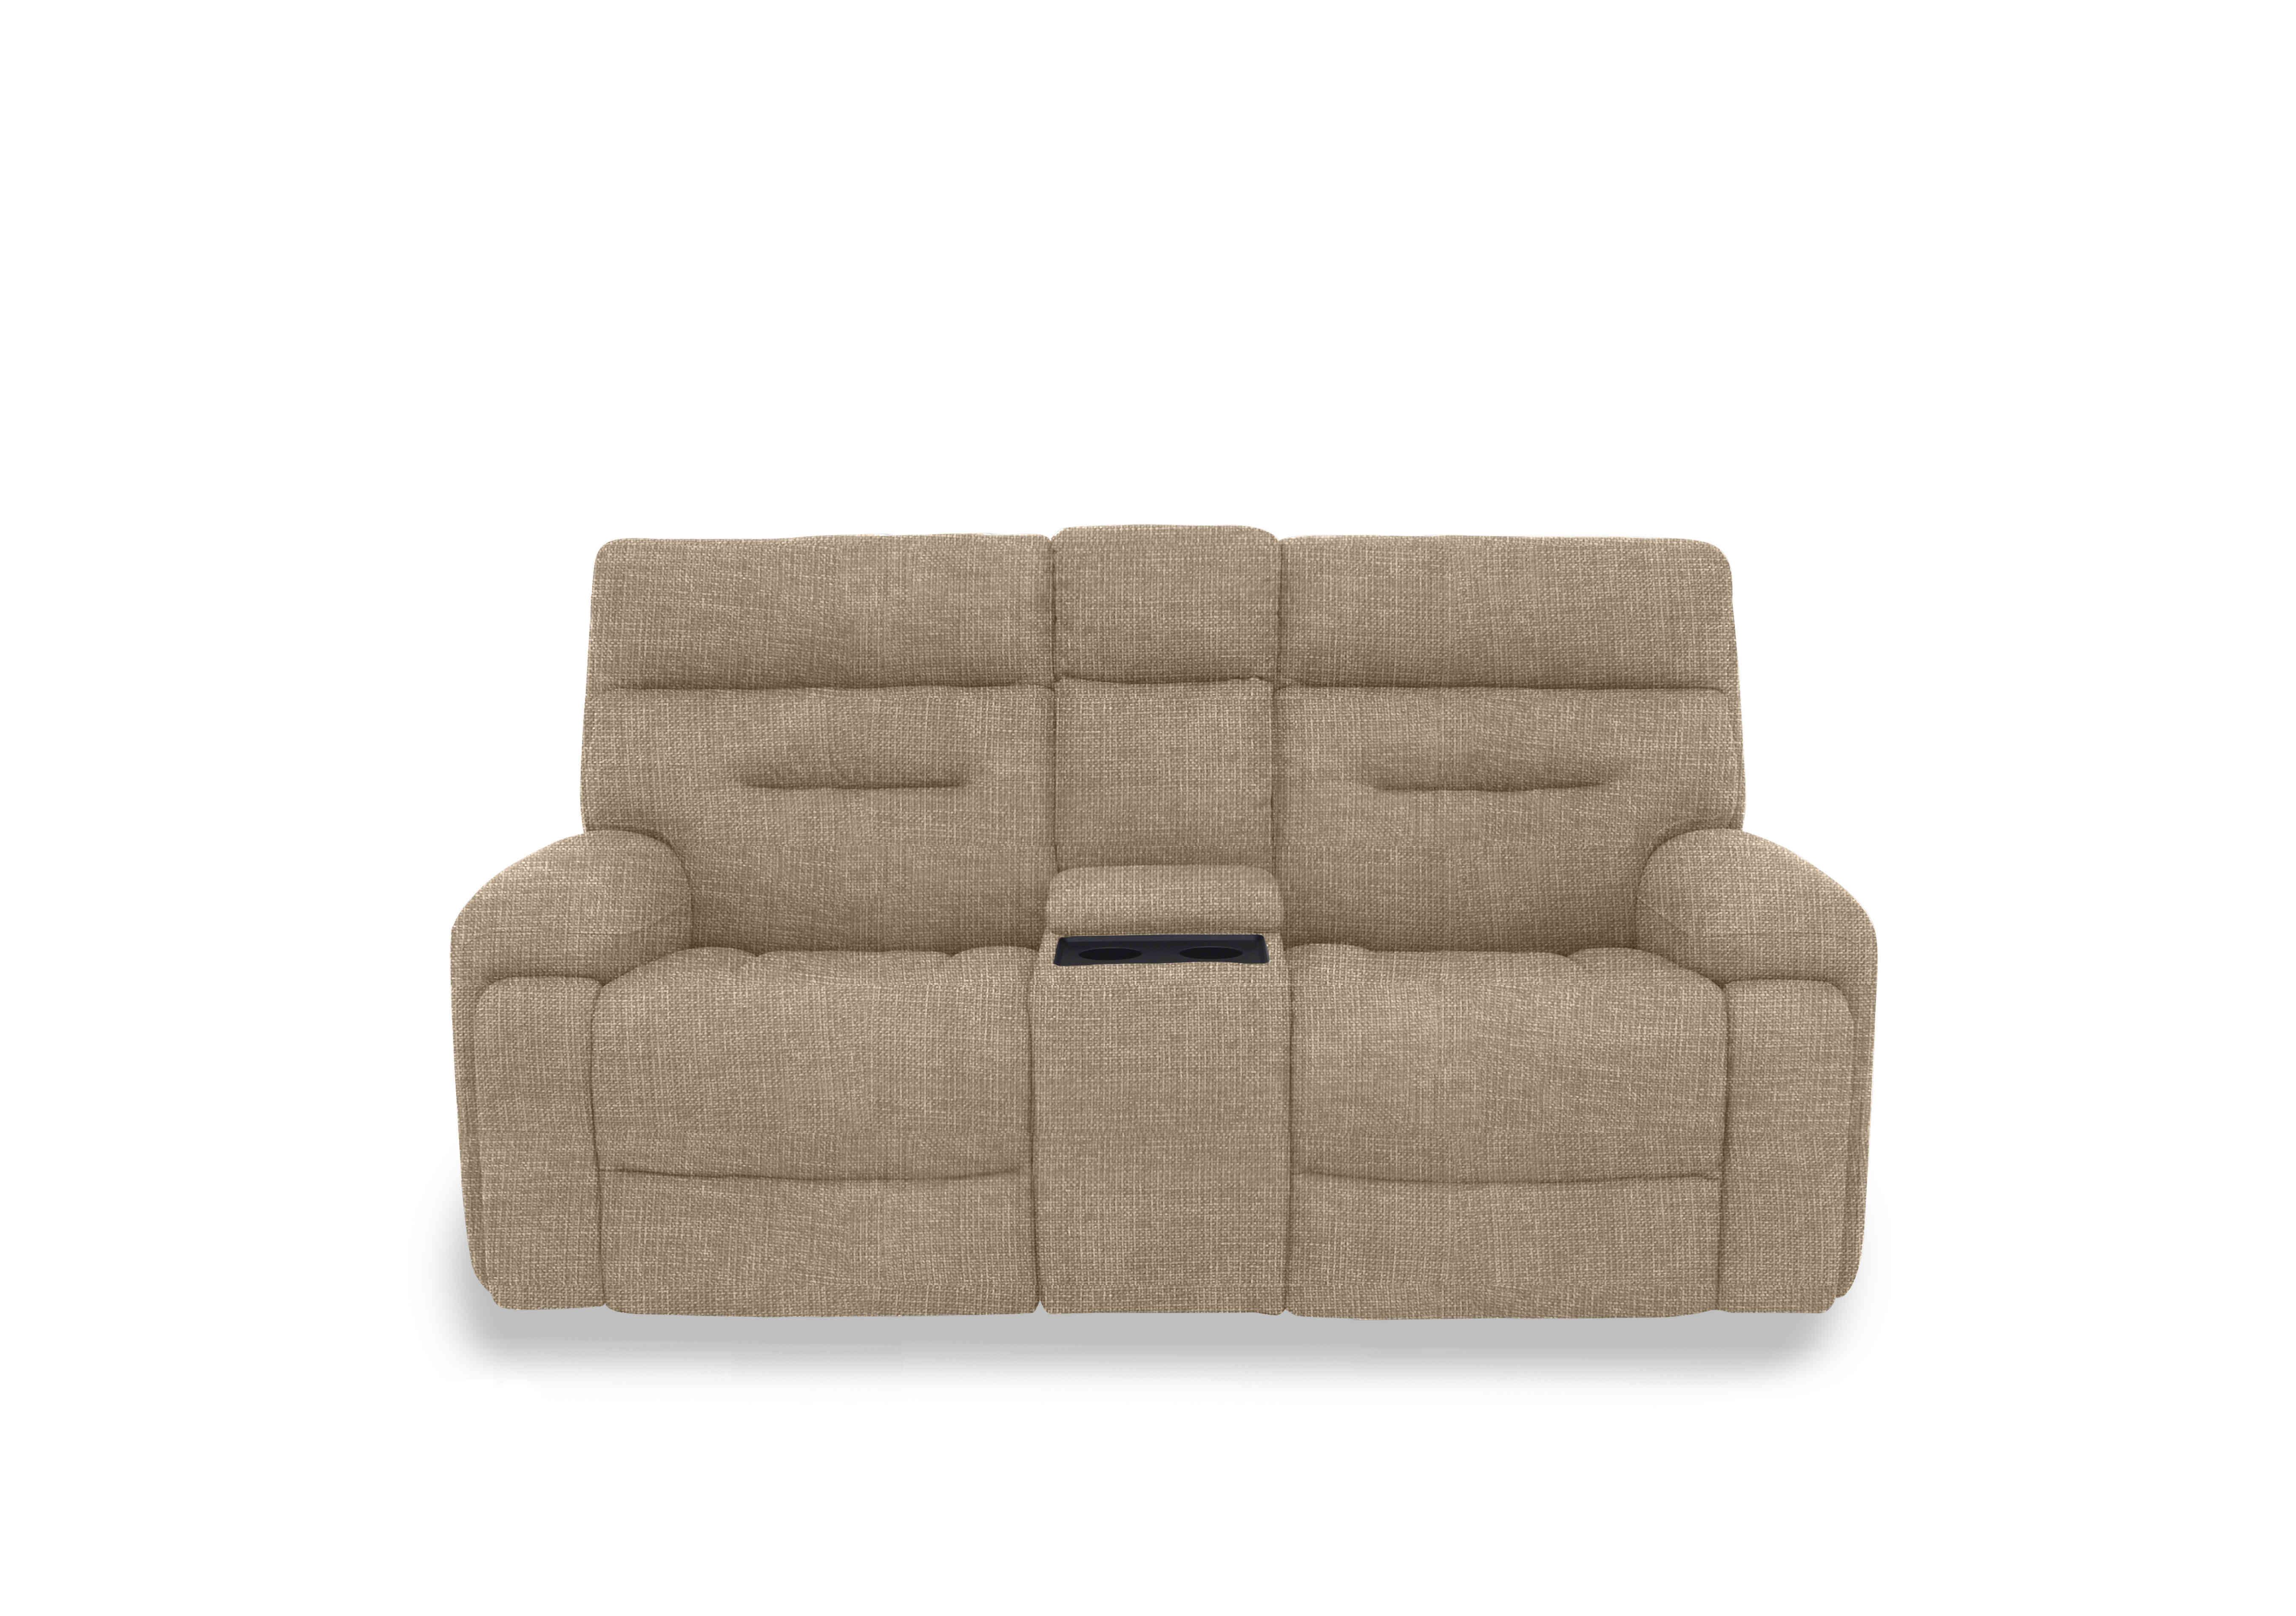 Cinemax Media 2 Seater Fabric Power Recliner Sofa with Power Headrests in We-0103 Weave Cocoa on Furniture Village